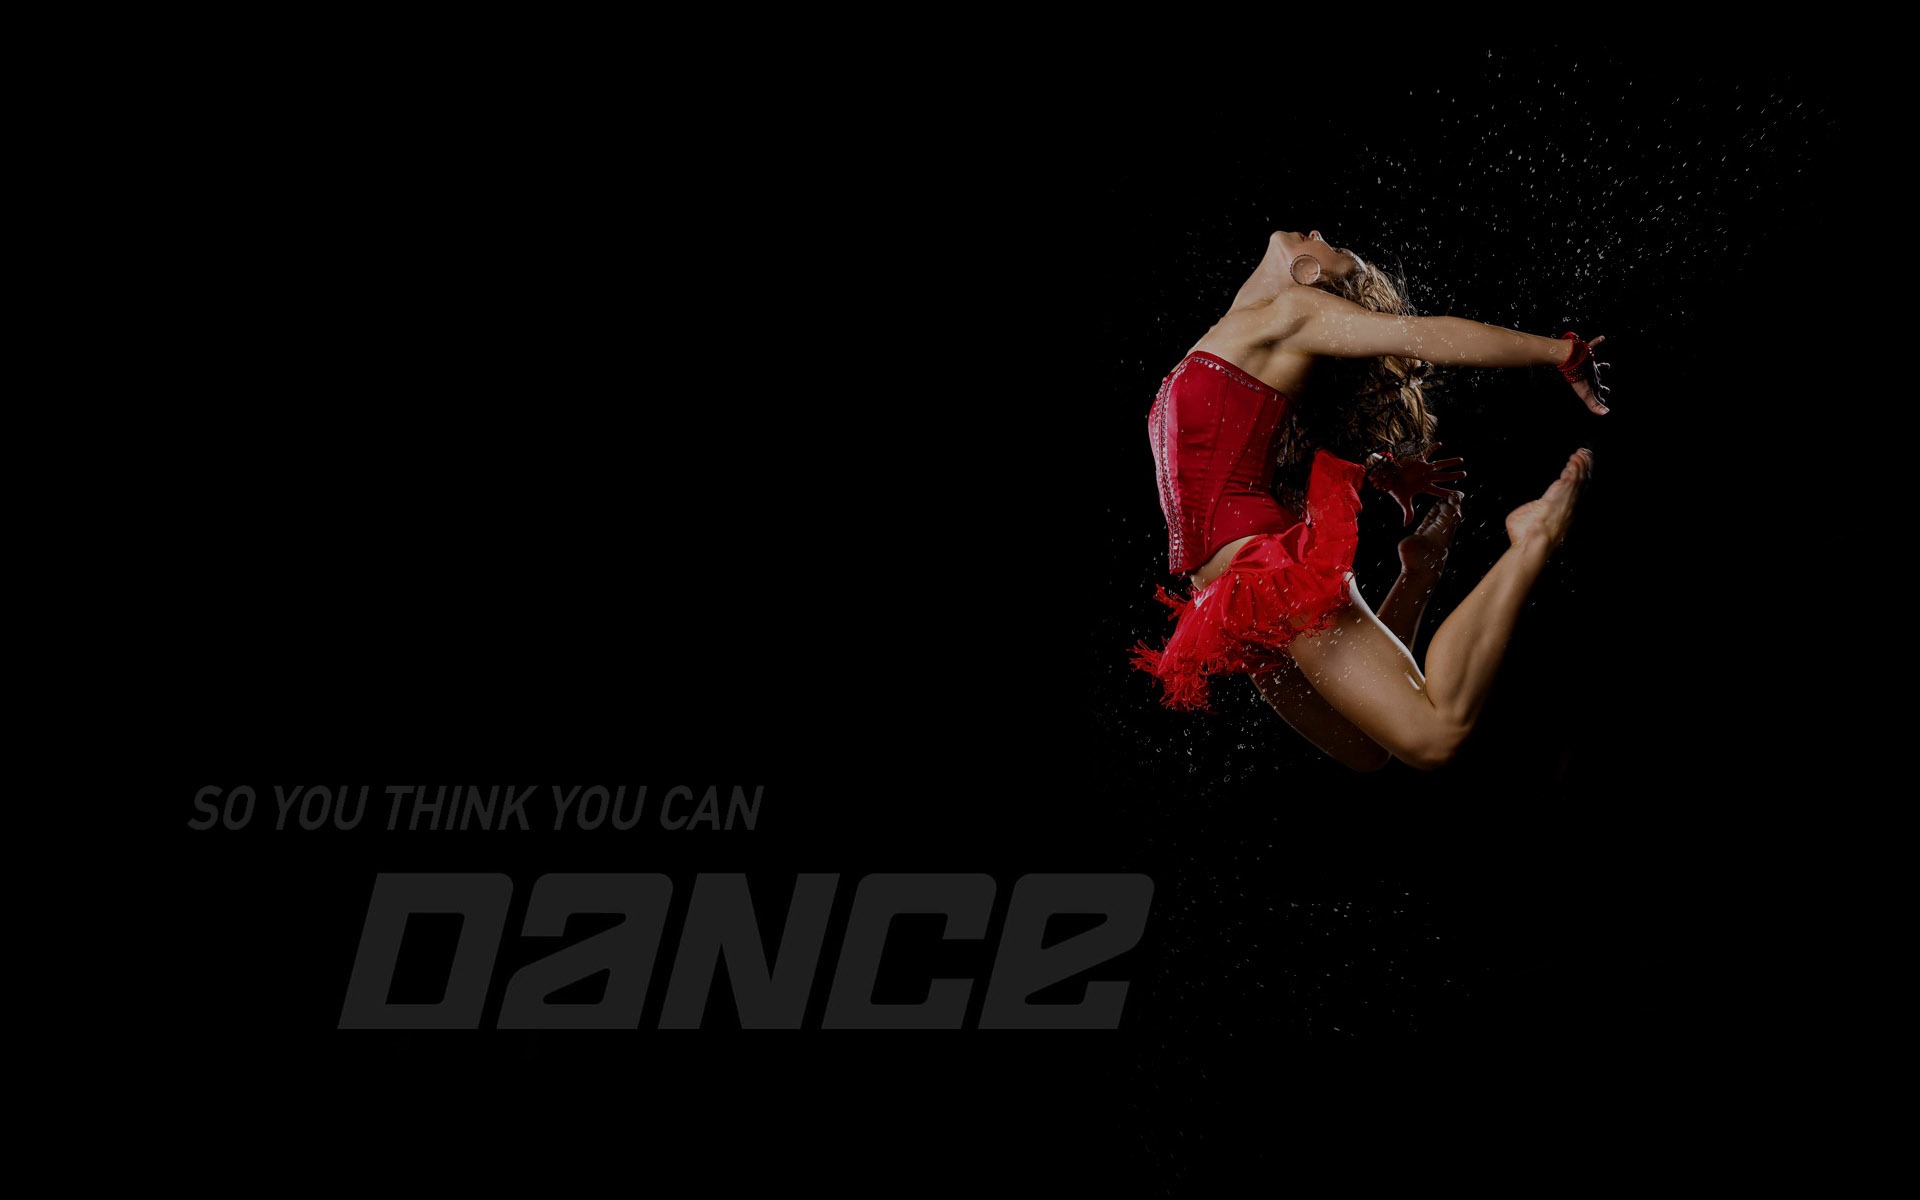 So You Think You Can Dance 舞林争霸 壁纸(二)1 - 1920x1200